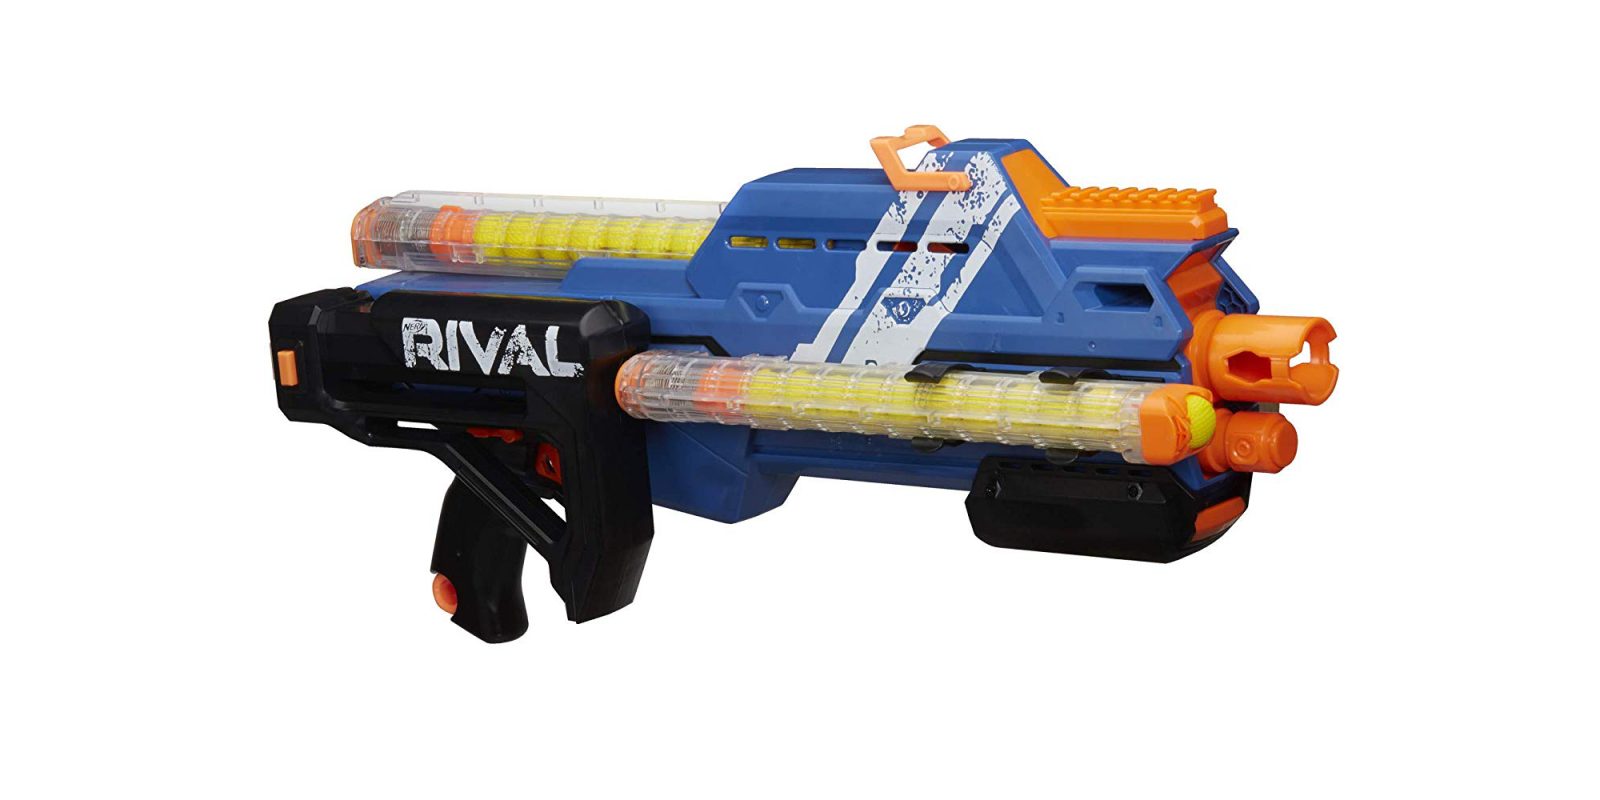 Nerf Rival Hypnos fires rounds at 100-feet per second: $35.50 (30% off ...